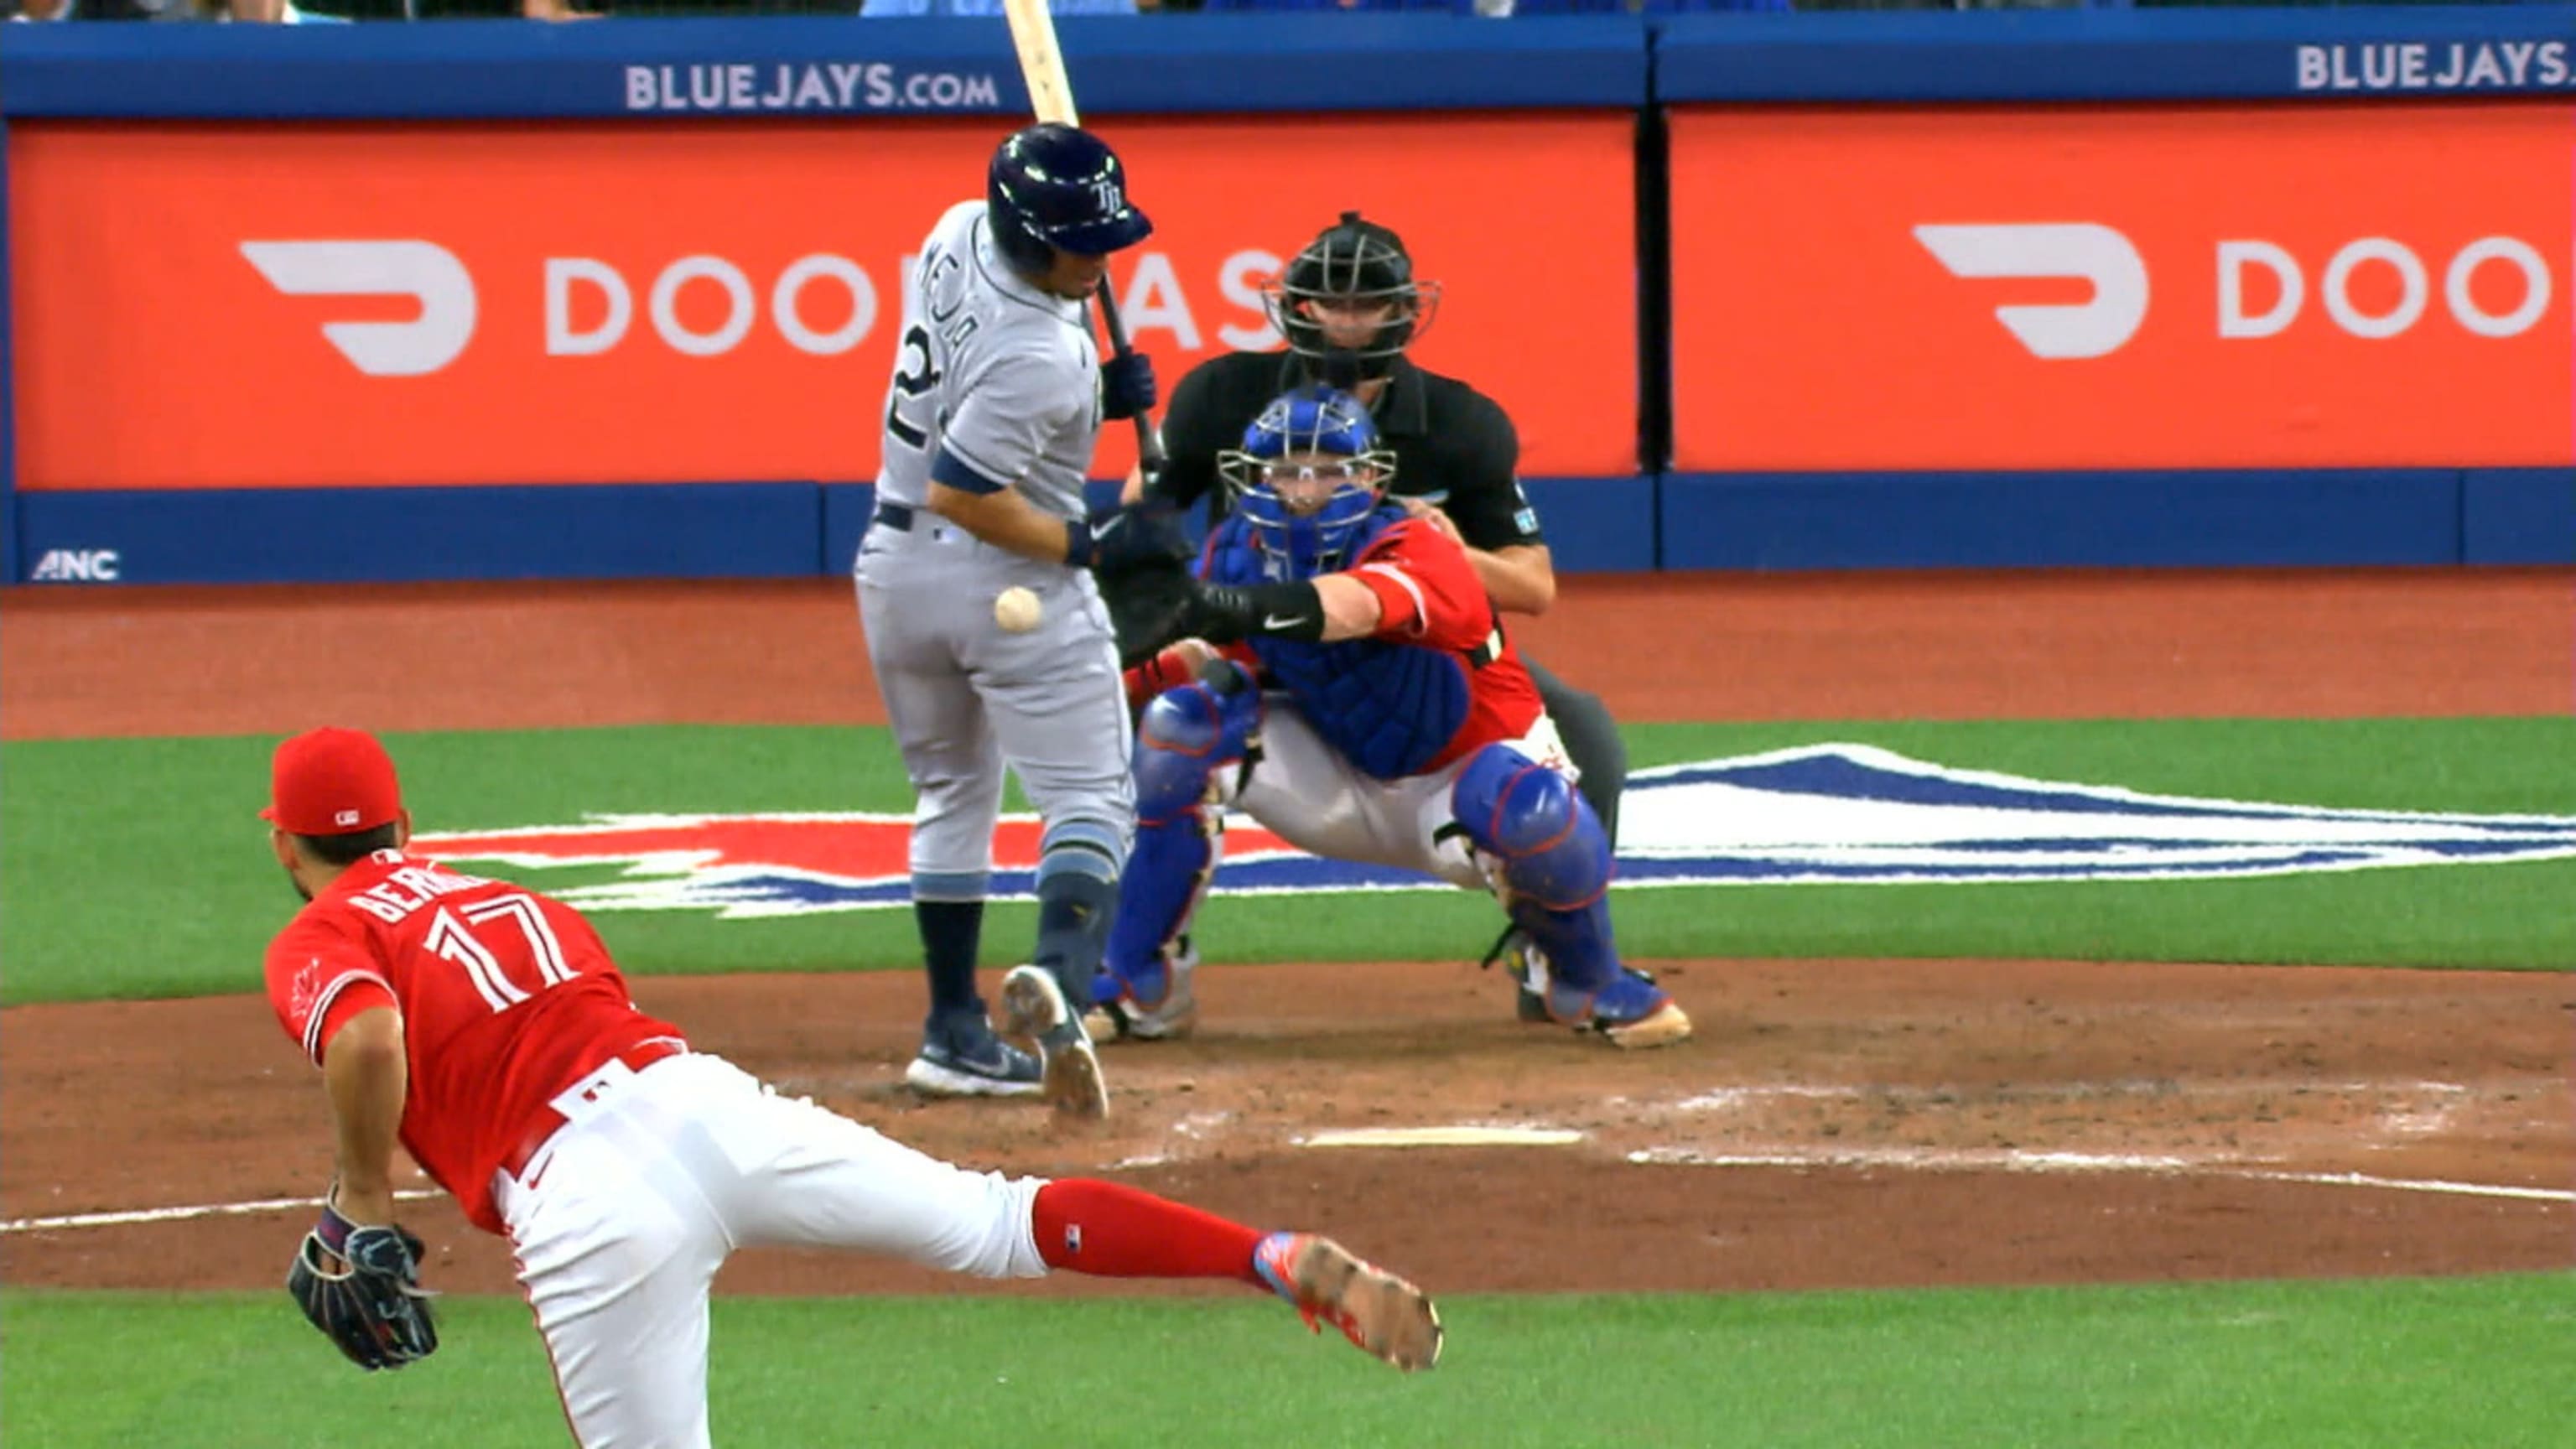 Bichette matches career high and Ray fans 13 for Jays, Giants